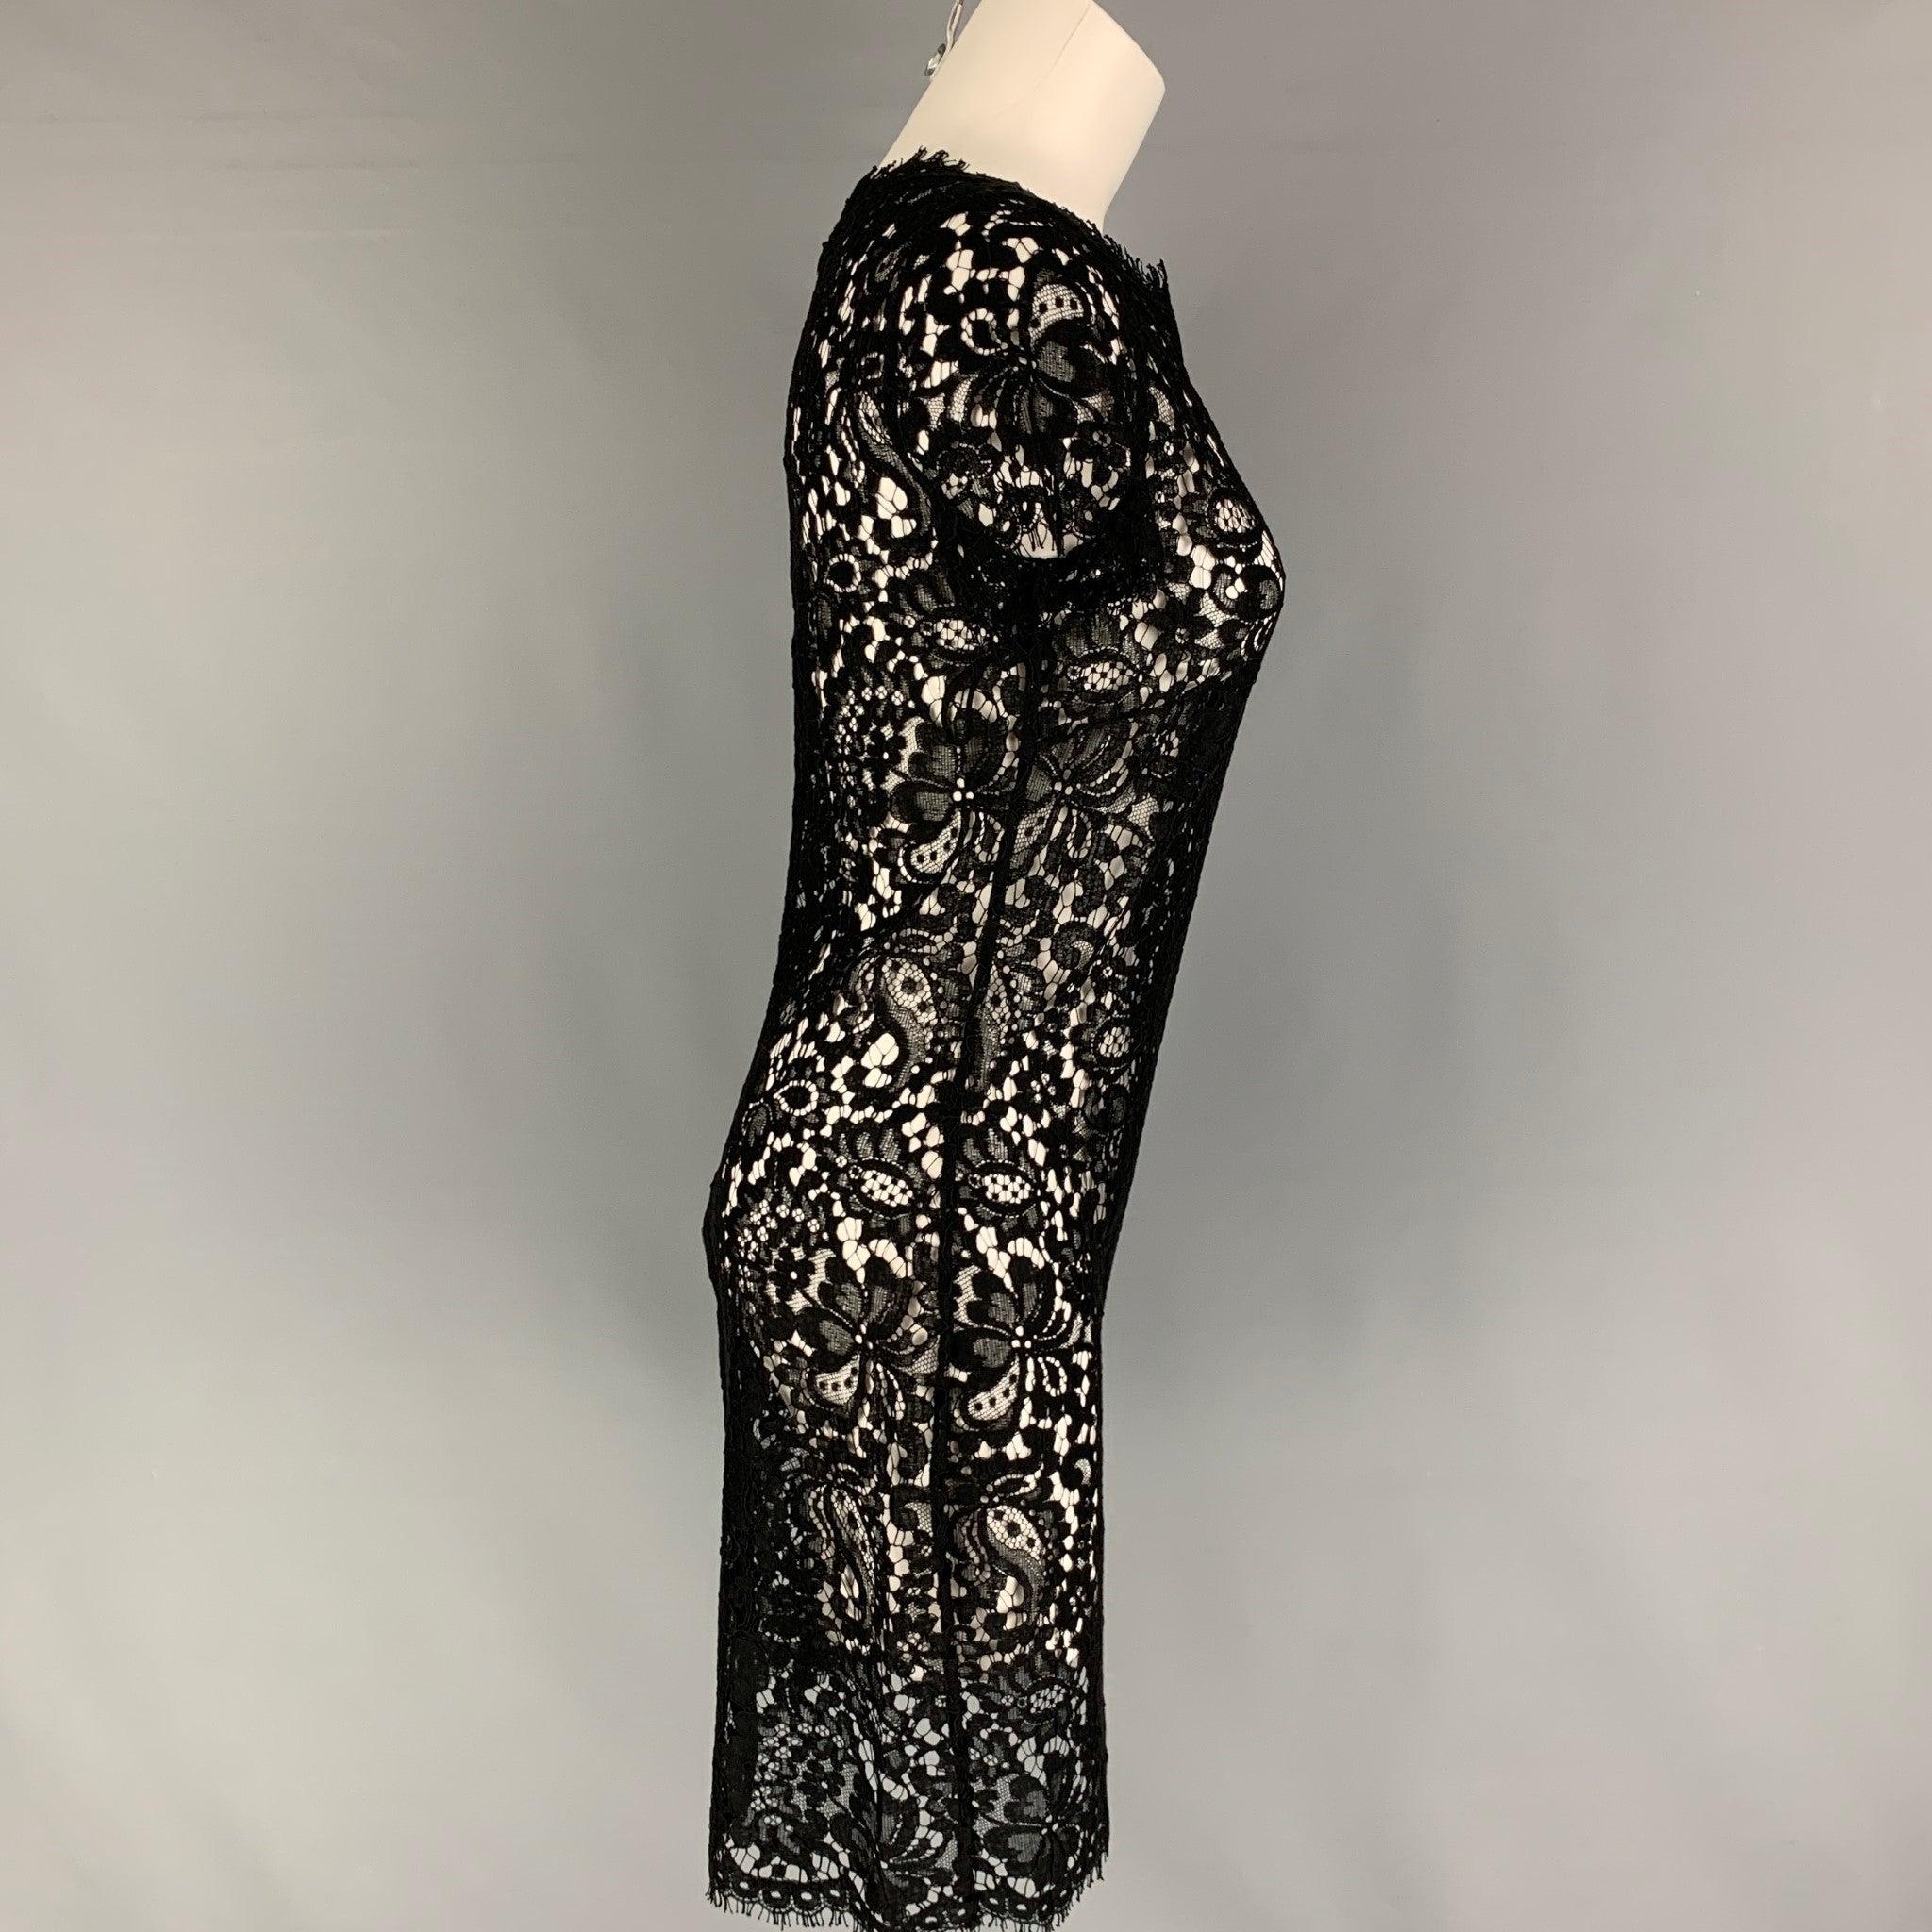 RALPH LAUREN 'Black Label' dress comes in a black lace cotton blend featuring short sleeves and a back zip up closure.
Very Good
Pre-Owned Condition. 

Marked:   4 

Measurements: 
 
Shoulder: 13 inches  Bust: 32 inches  Waist:
29 inches  Hip: 35